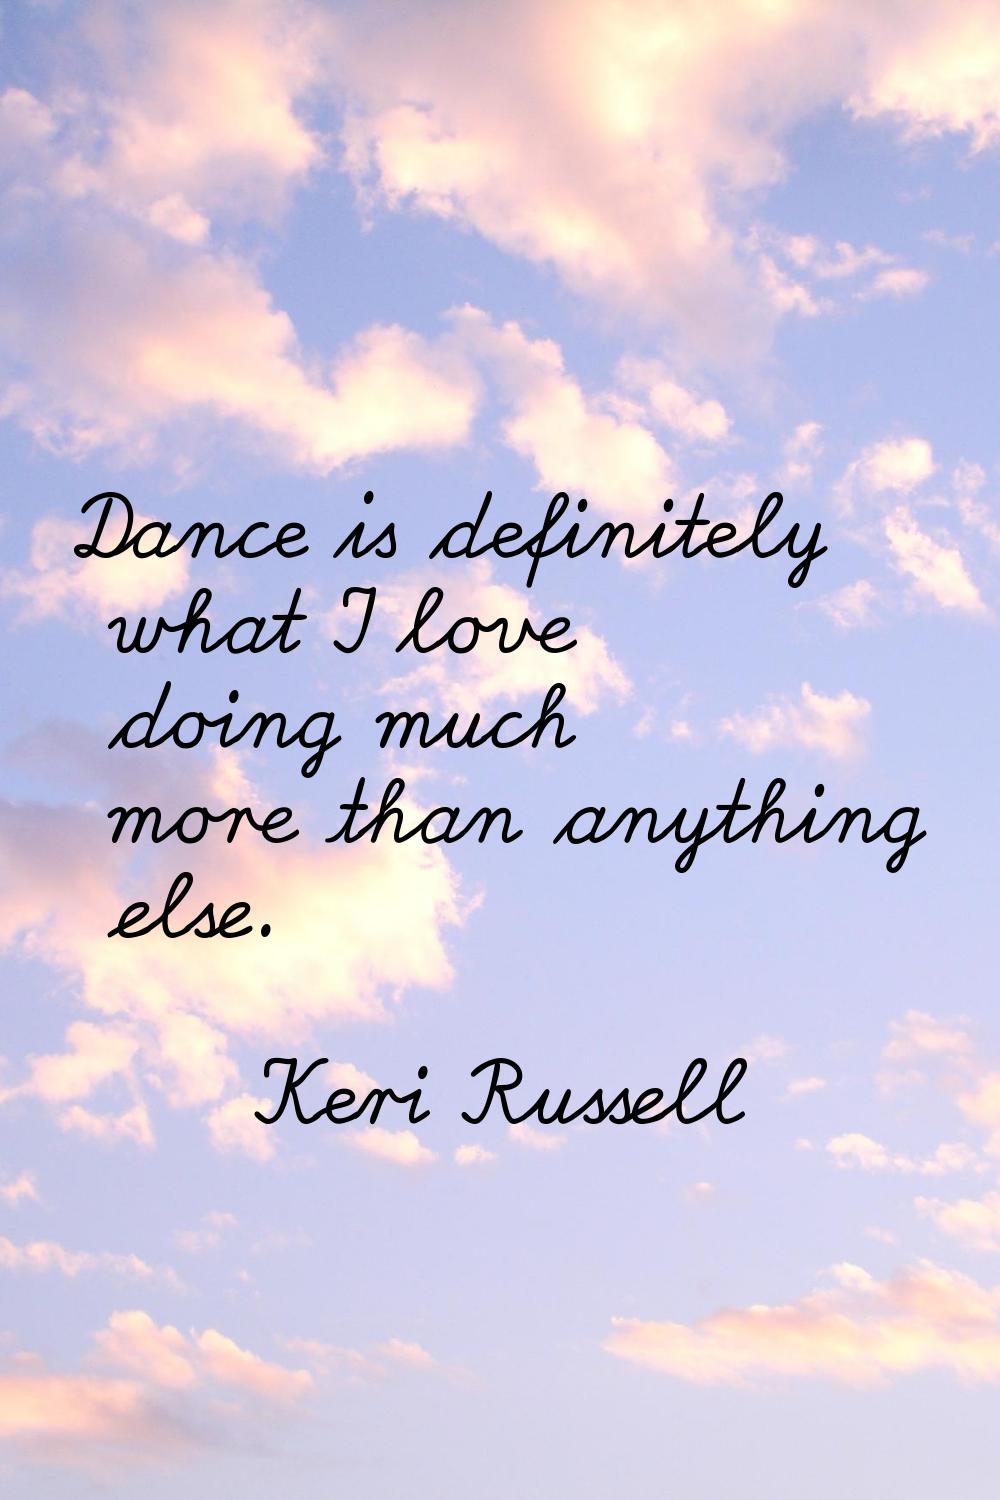 Dance is definitely what I love doing much more than anything else.